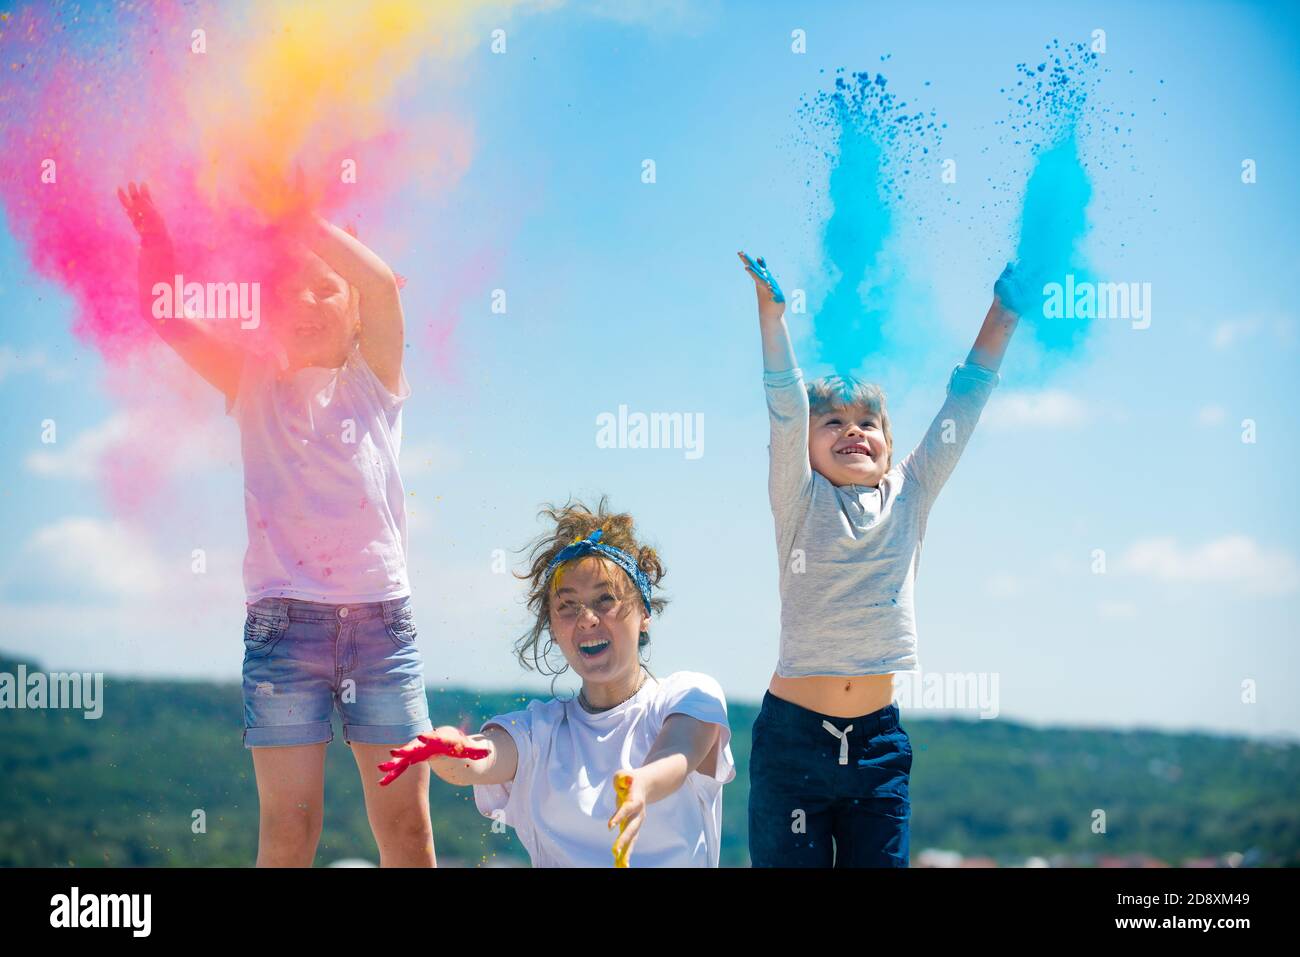 Excited children painted in the colors of Holi festival. Kids splashing colorful paint. Stock Photo